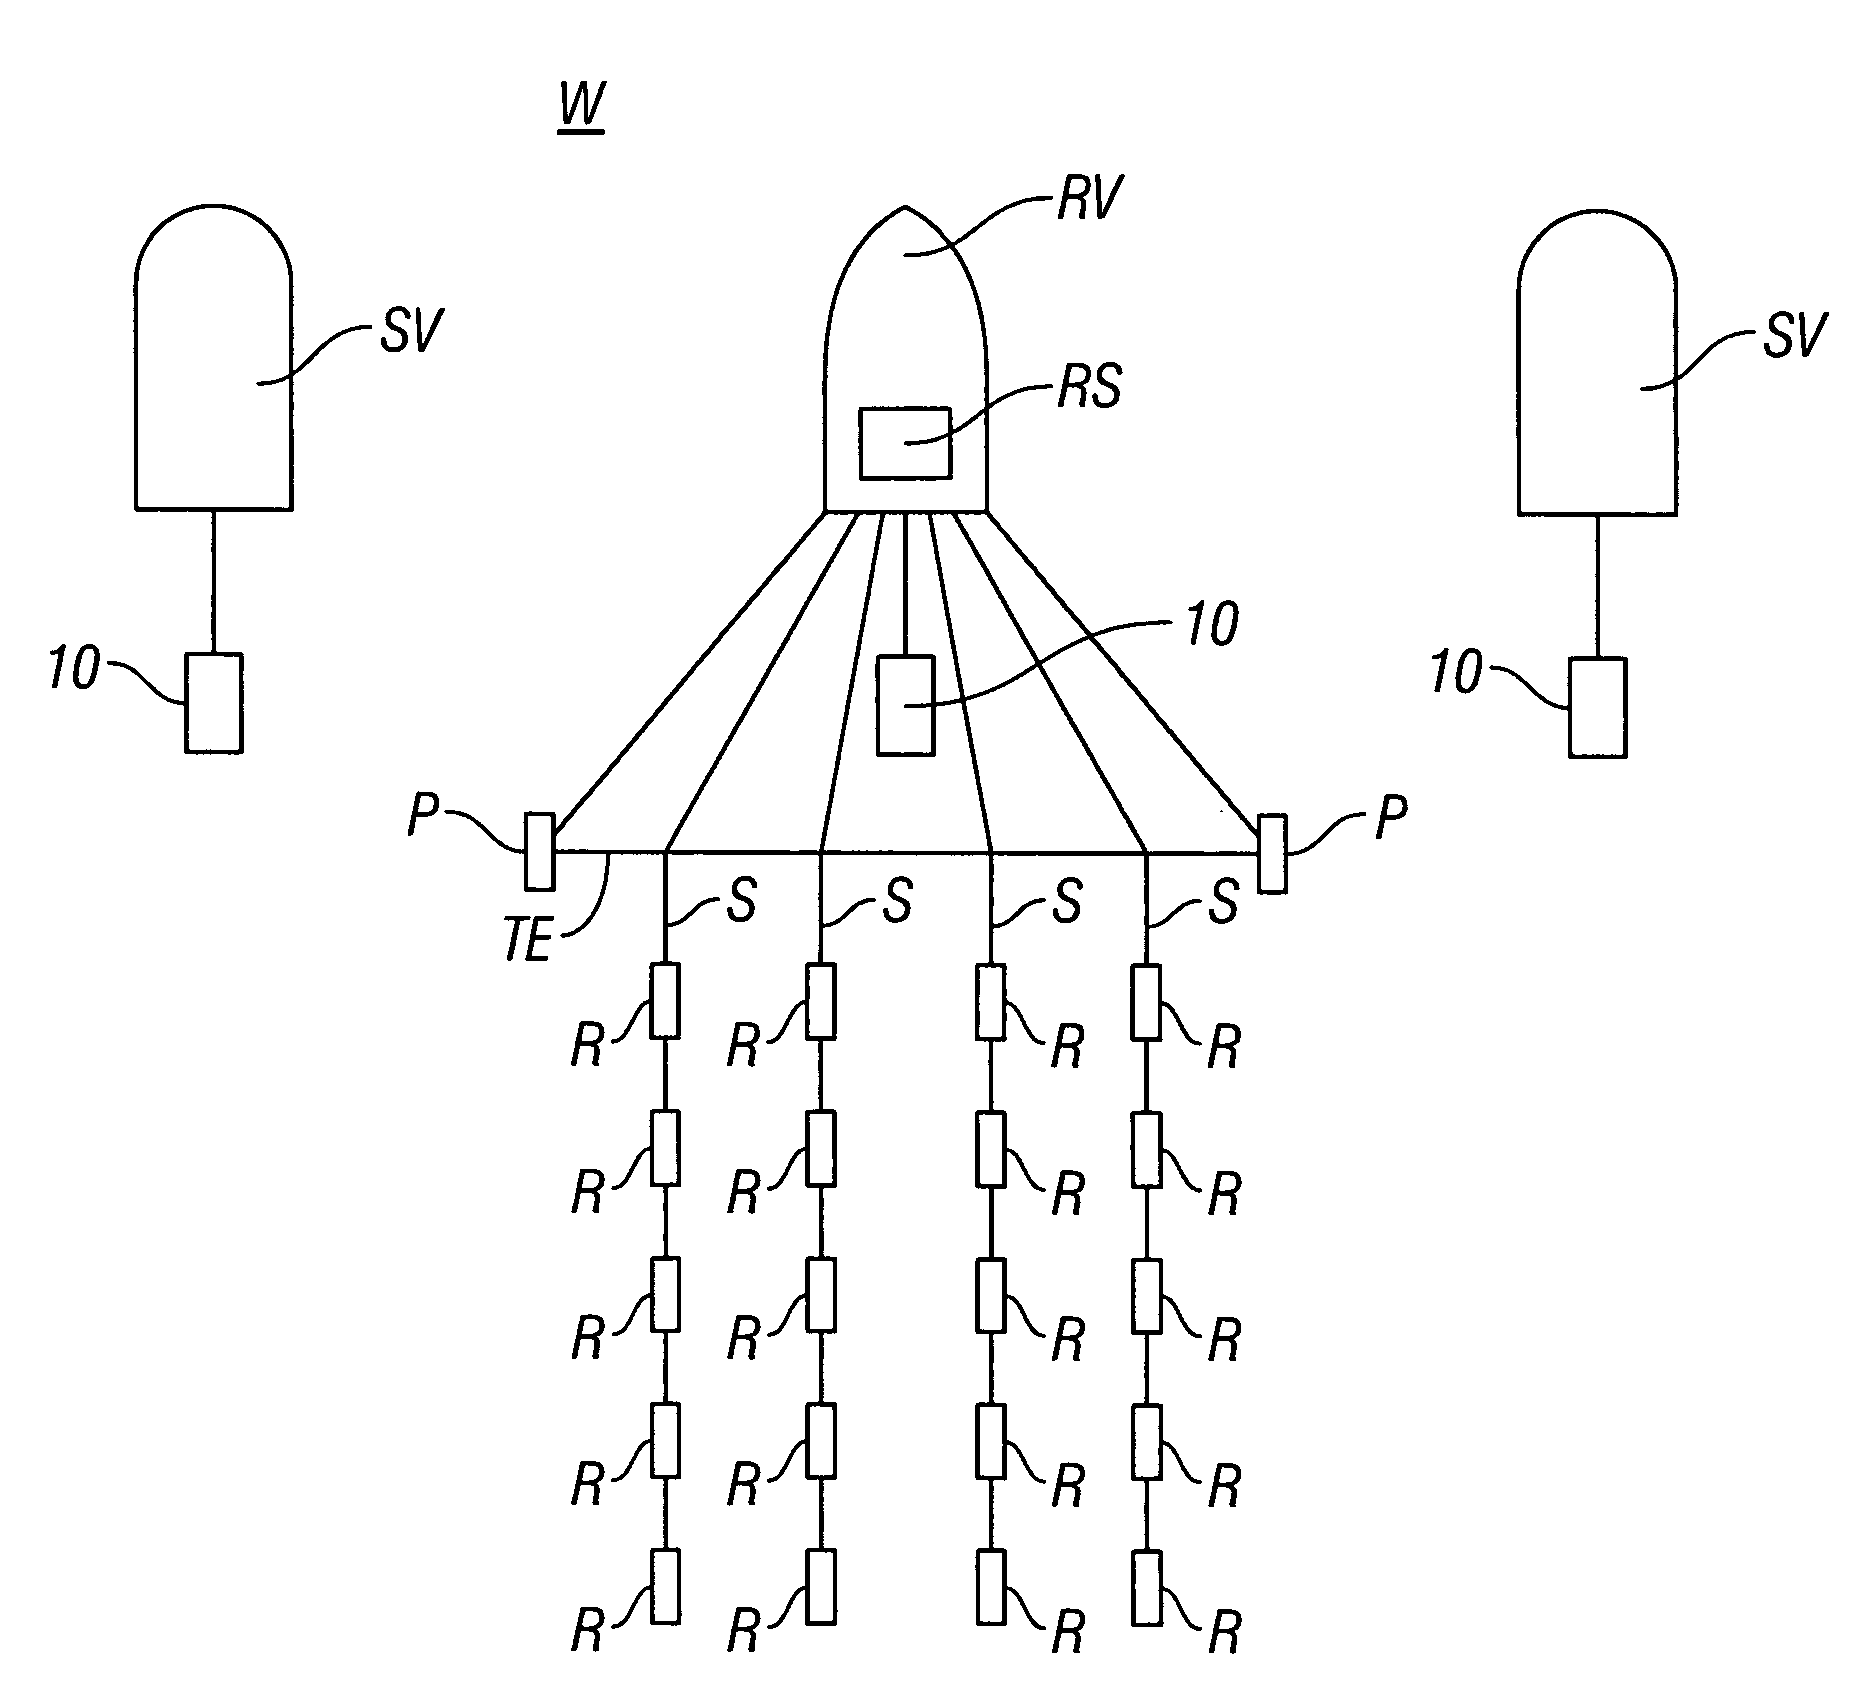 Method for optimizing energy output of from a seismic vibrator array